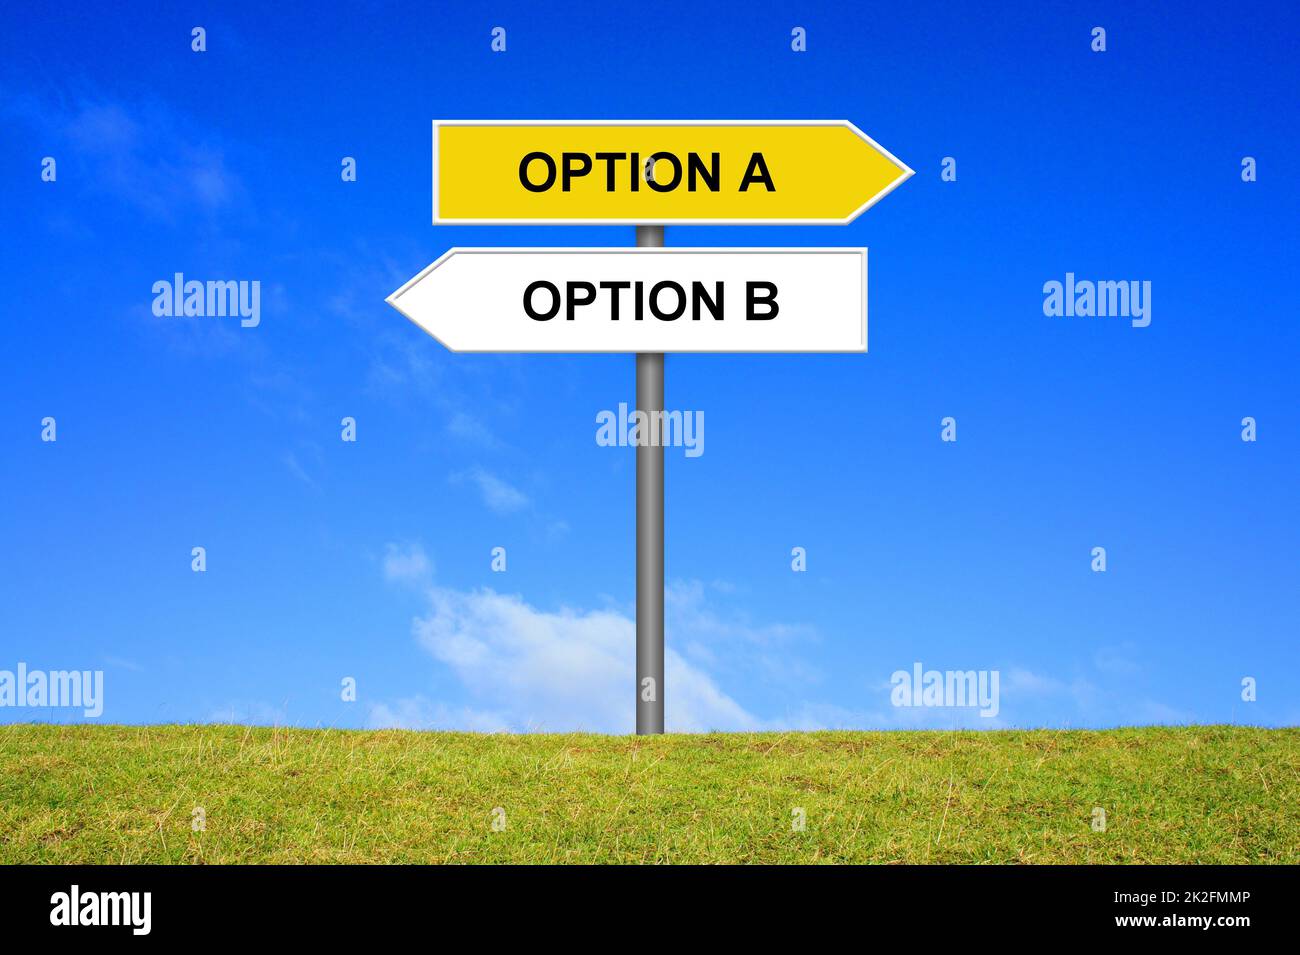 Signpost showing Option A and Option B Stock Photo